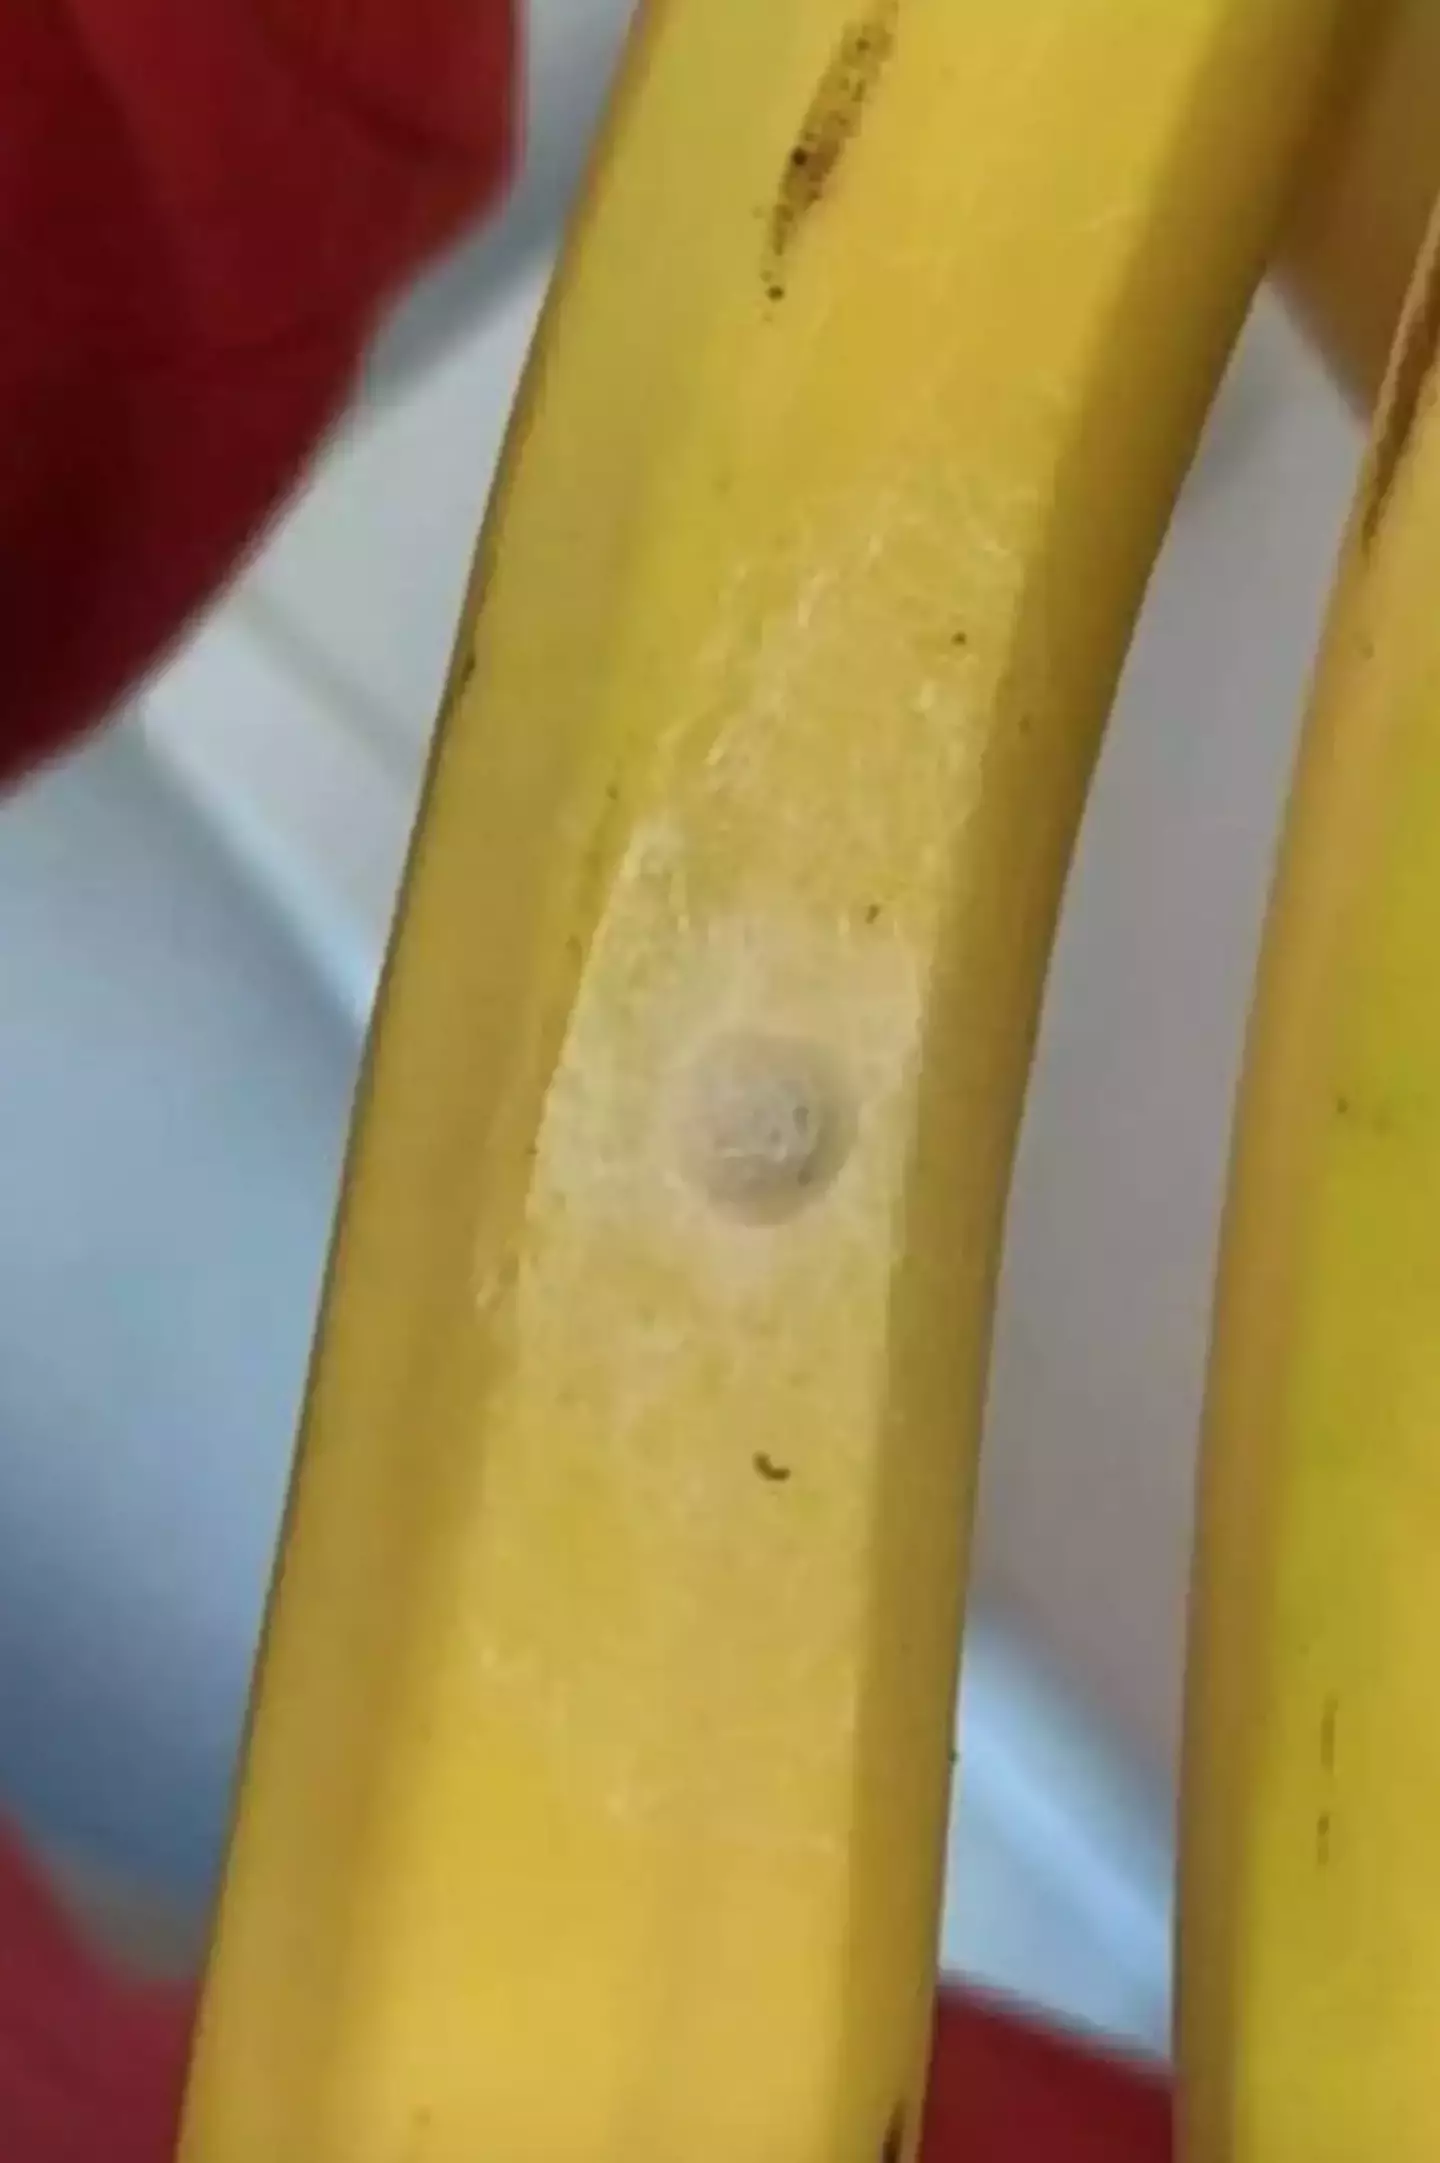 A shopper took to a Facebook group for answers about her spotty bananas.